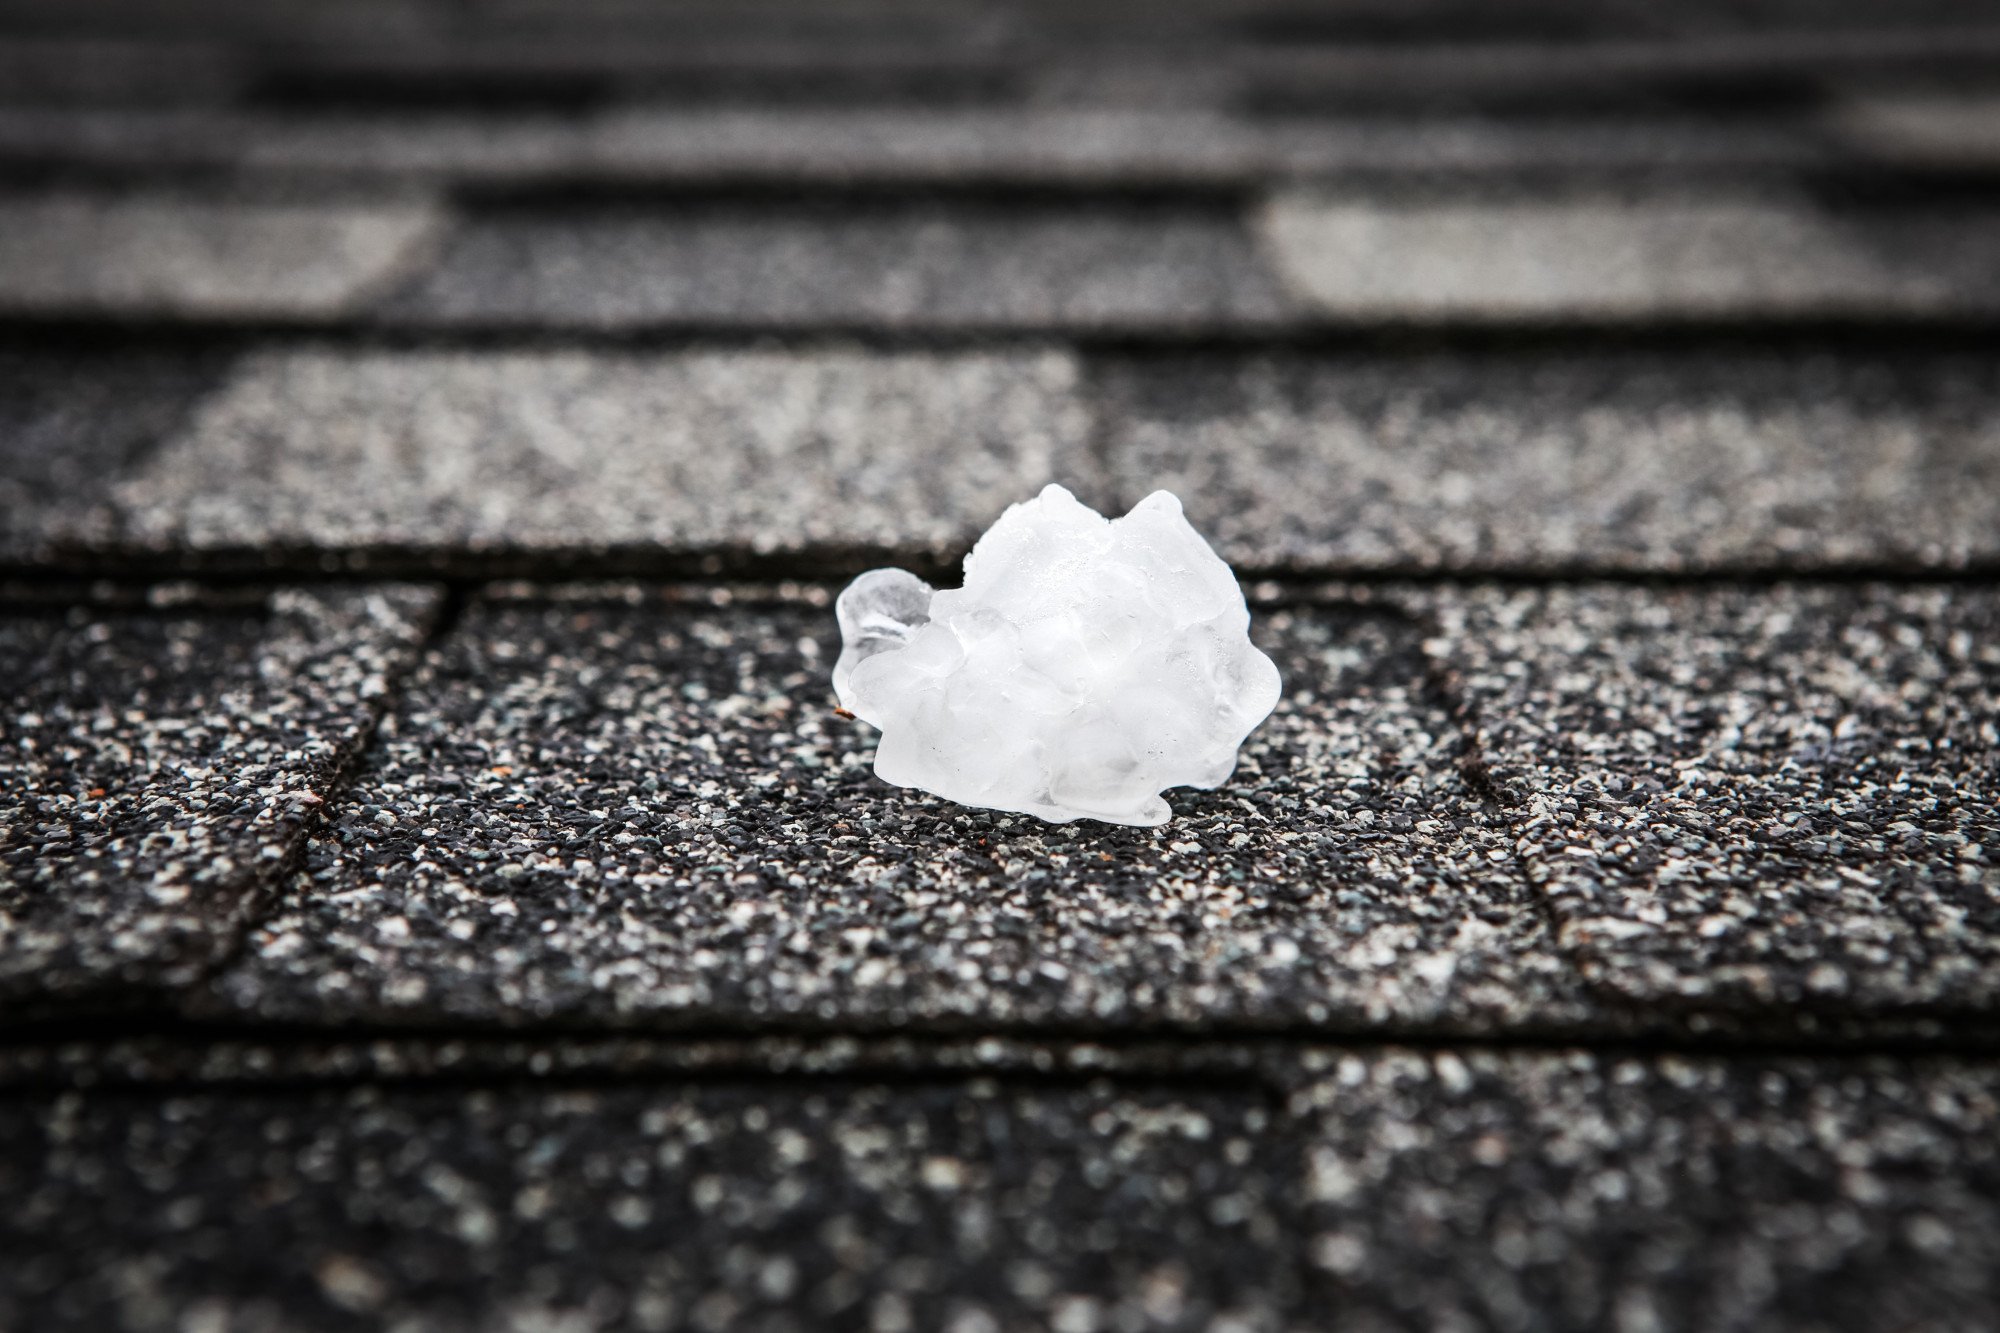 Repairing hail damage to shingles can sometimes be expensive, but how much exactly does it cost? Here's what you need to know!